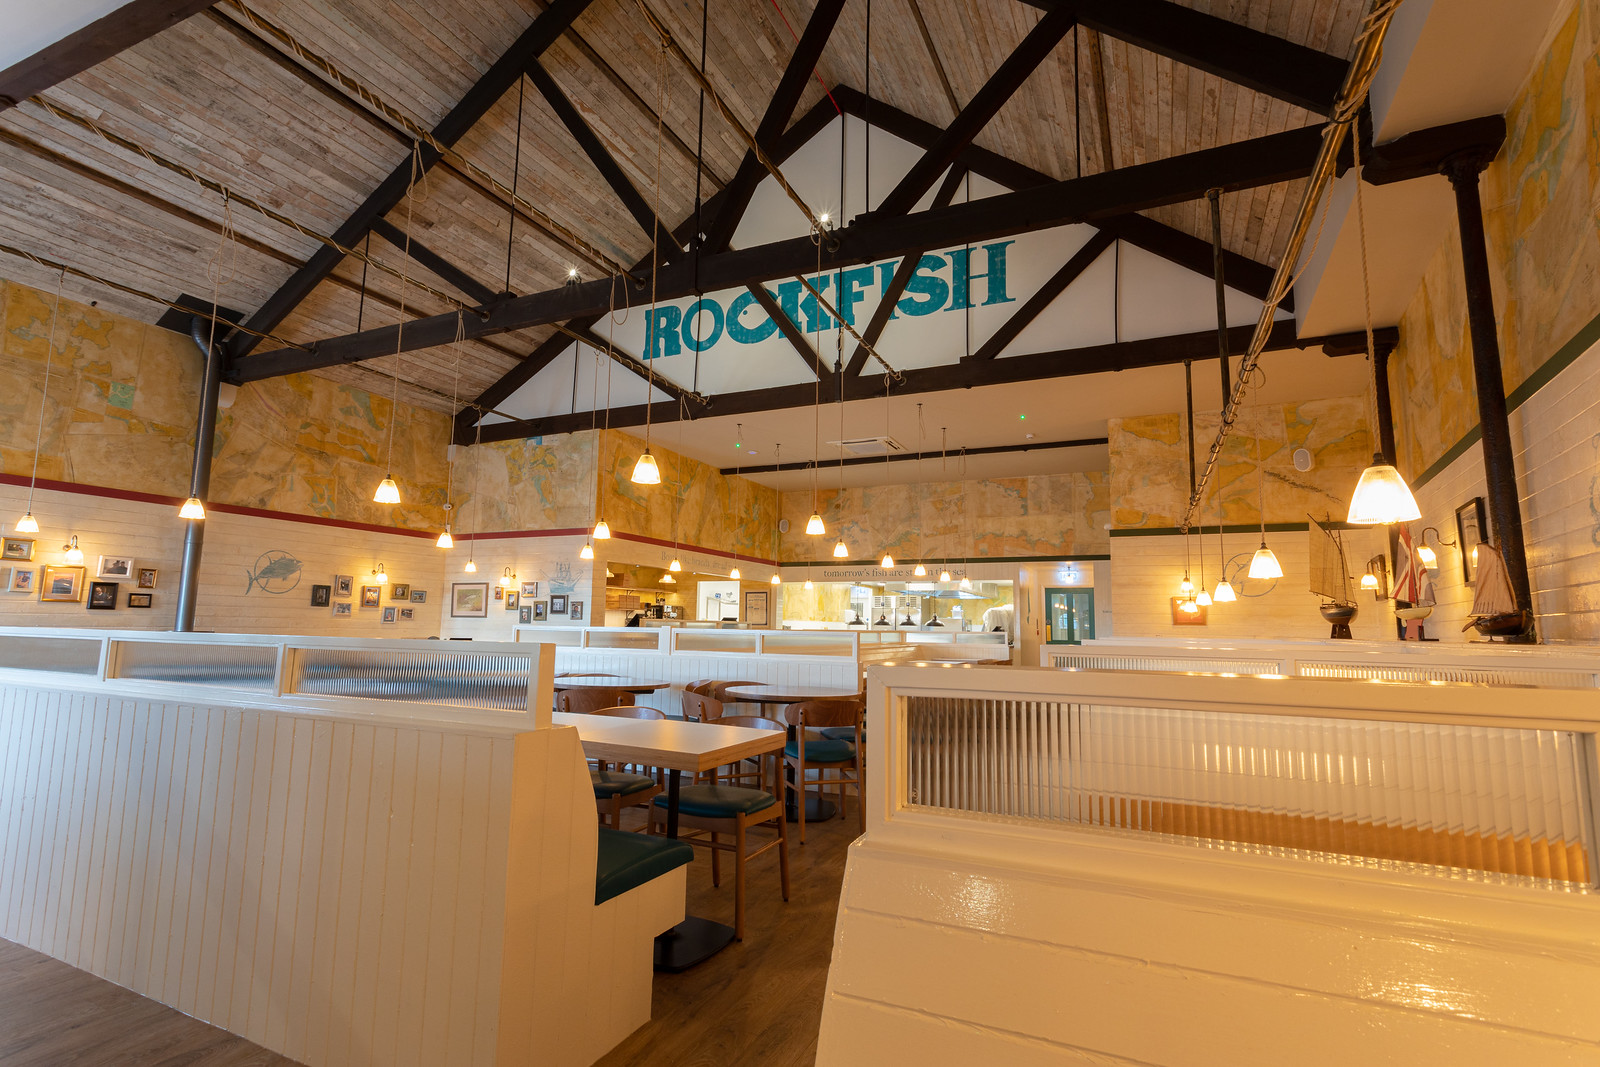 Inside the Rockfish restaurant situated at Poole Quay